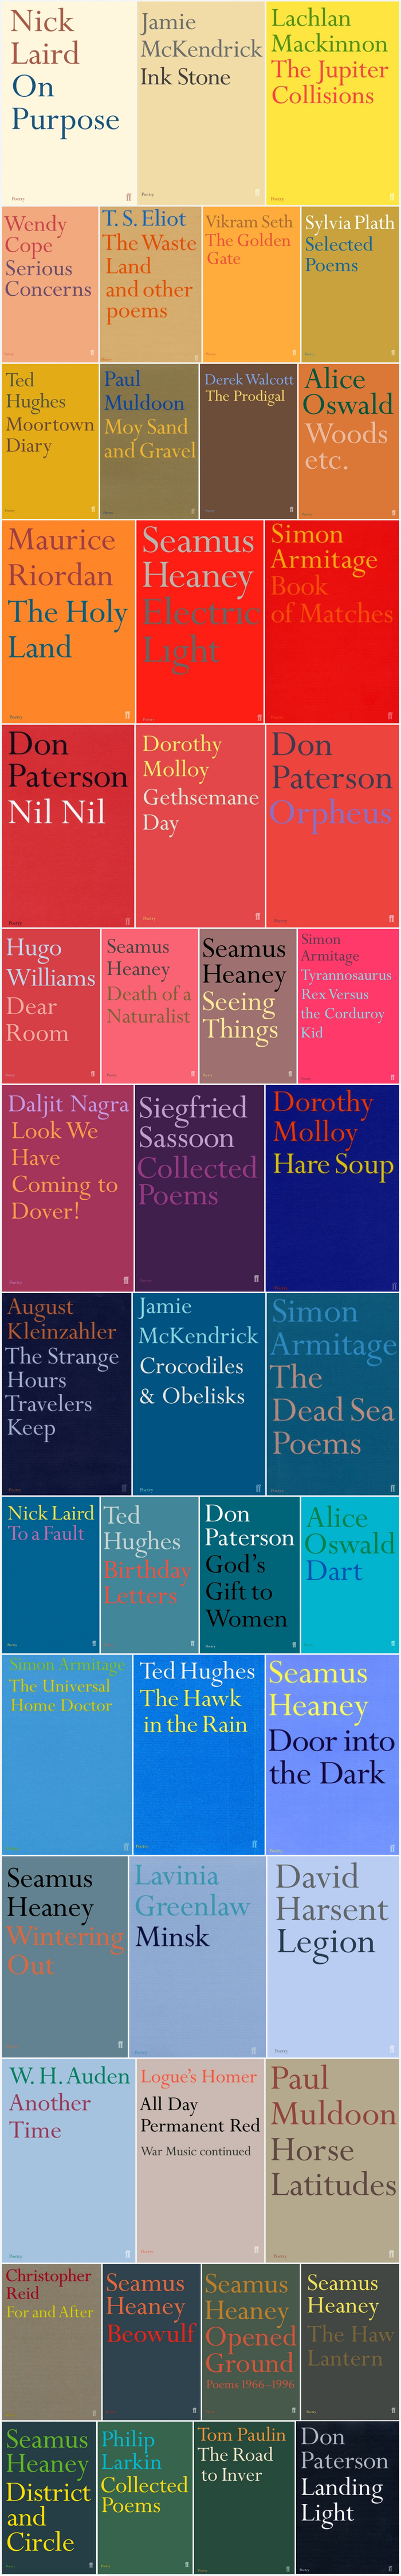 Faber Books showcases a selection of covers from the Poetry series on their Flickr photostream.